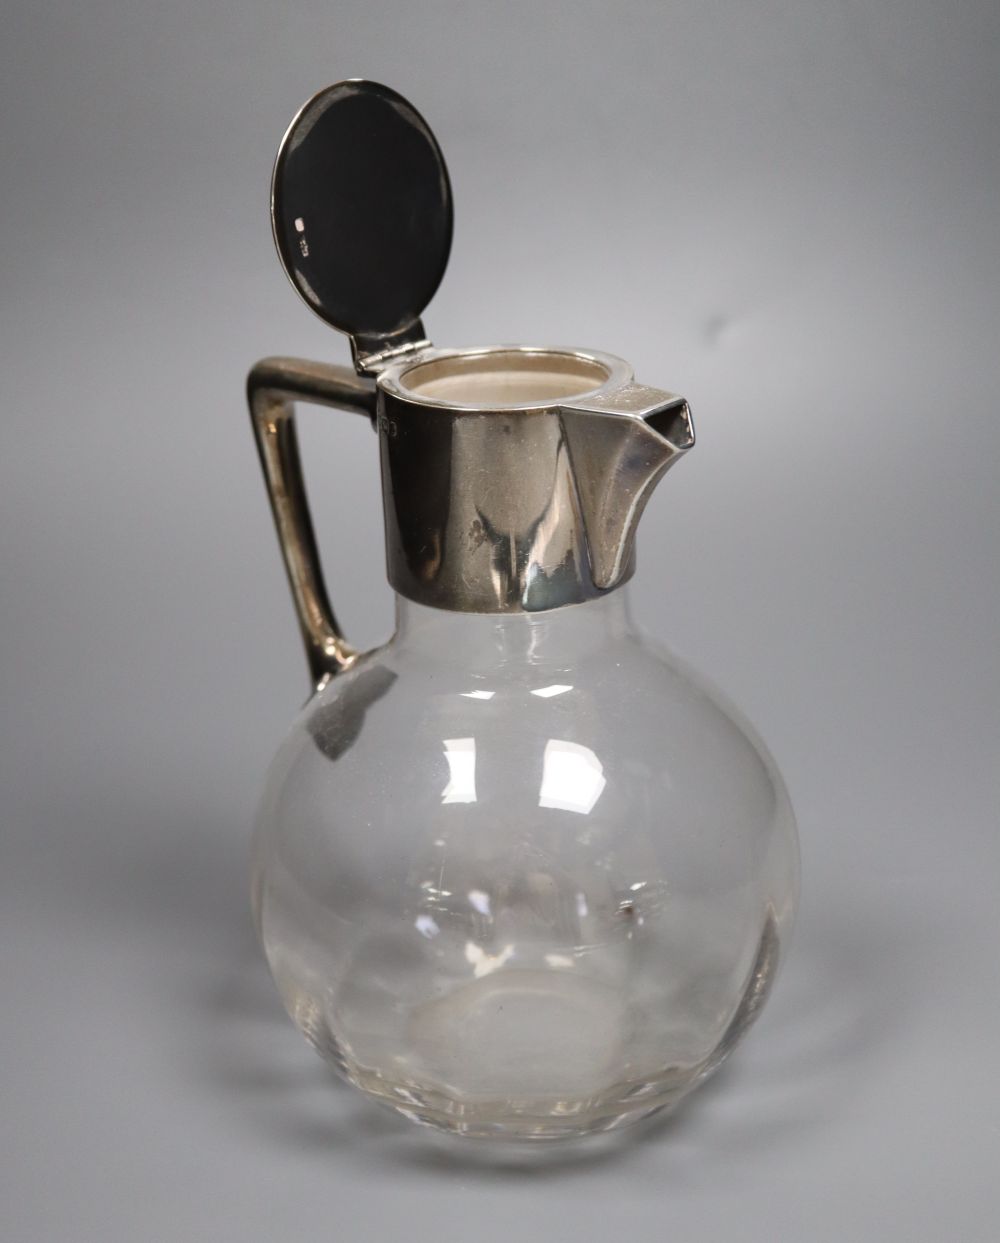 A late Victorian silver-mounted glass globular claret jug in the style of Christopher Dresser, Sheffield, 1897